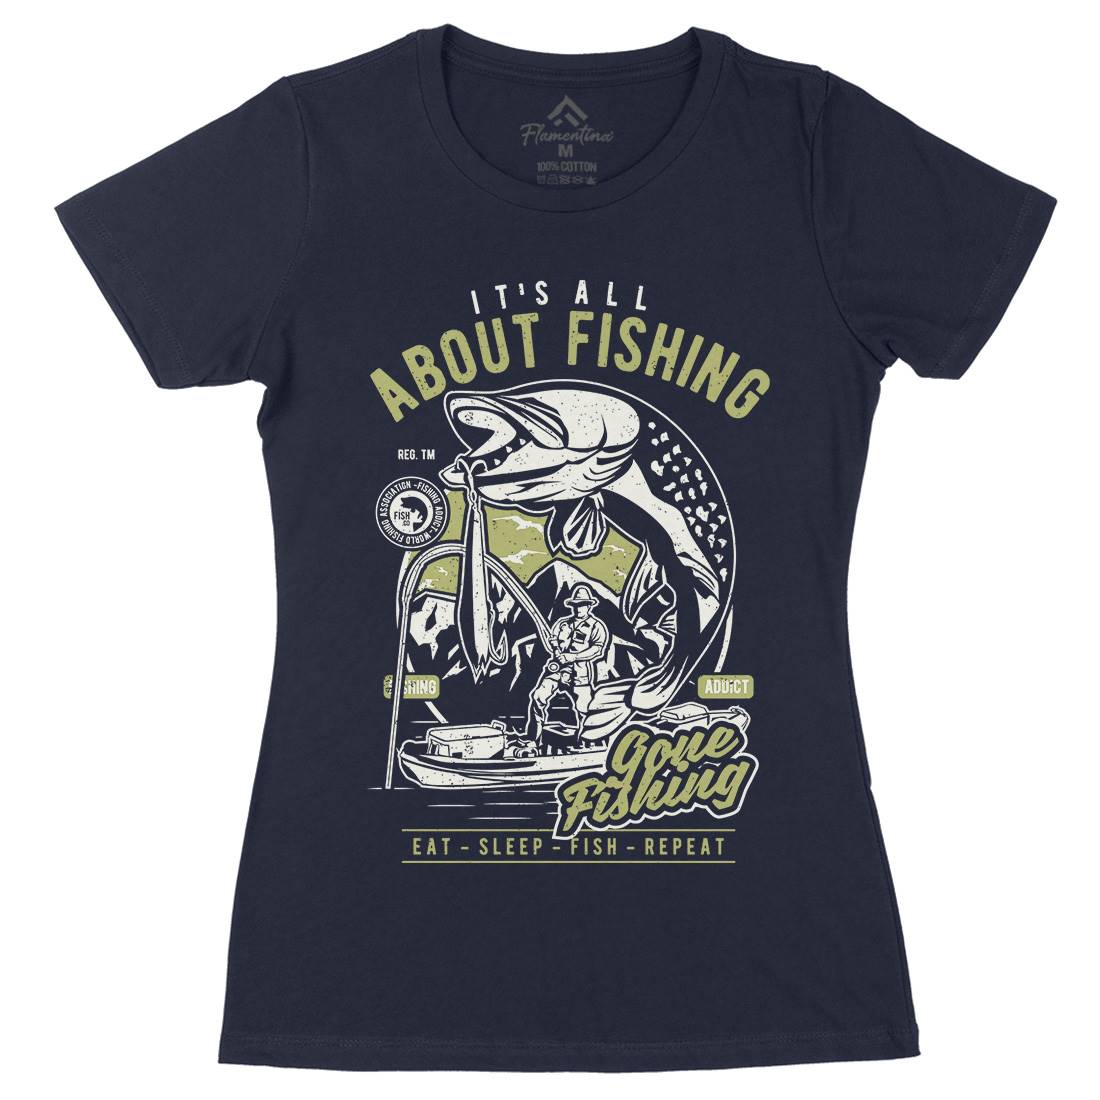 All About Womens Organic Crew Neck T-Shirt Fishing A604